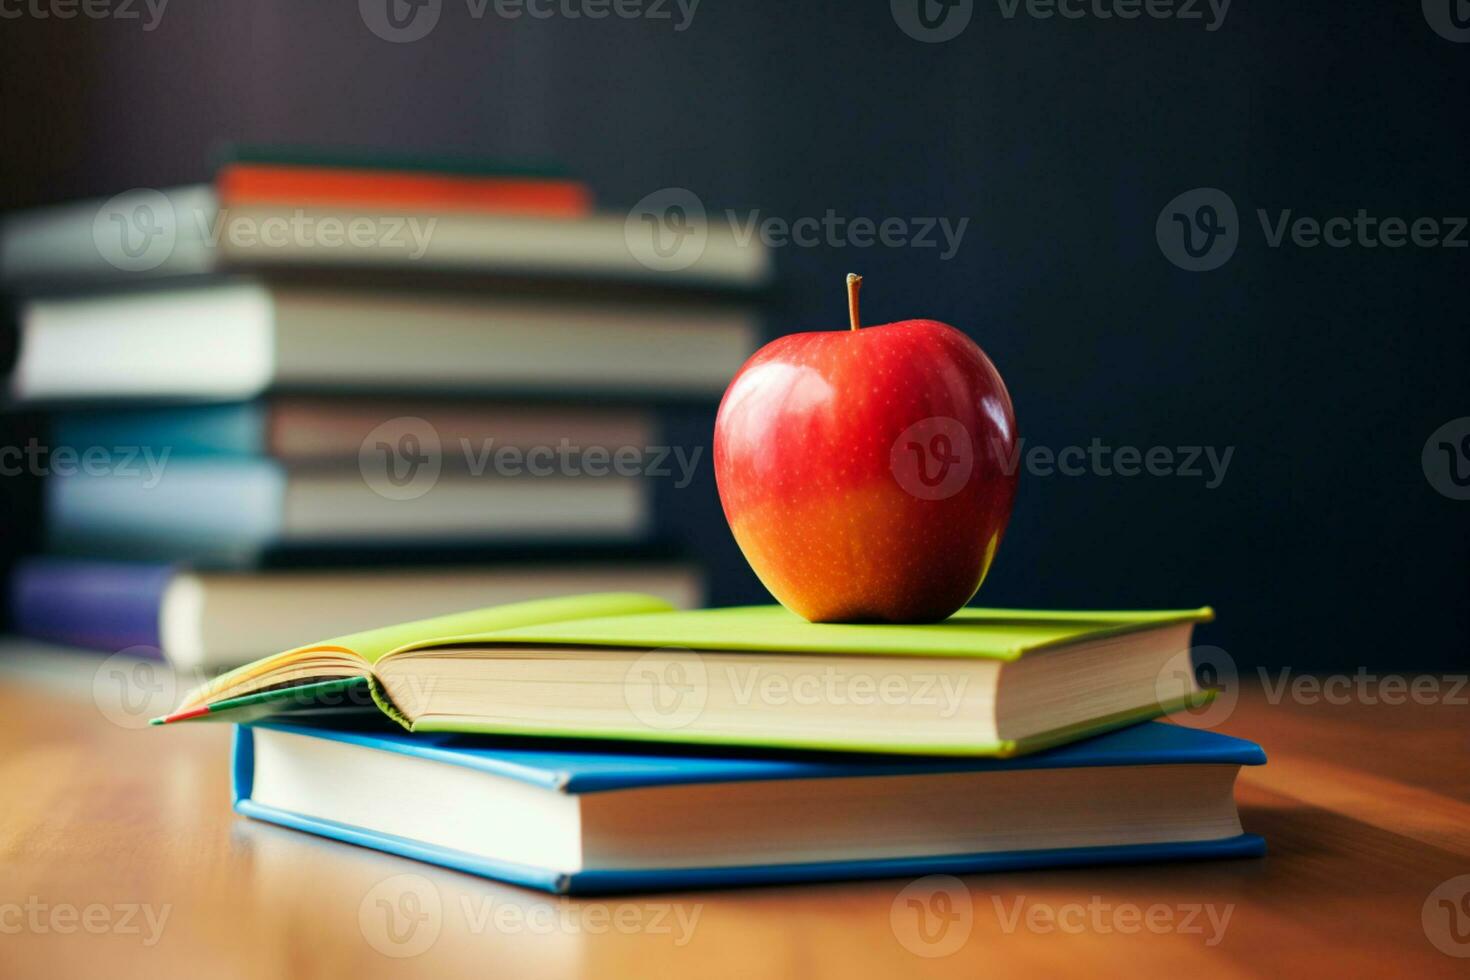 Teachers Day - Books and apples, symbols of knowledge and gratitude, adorn the table in celebration of the day of educators who shape minds and hearts. AI Generative photo